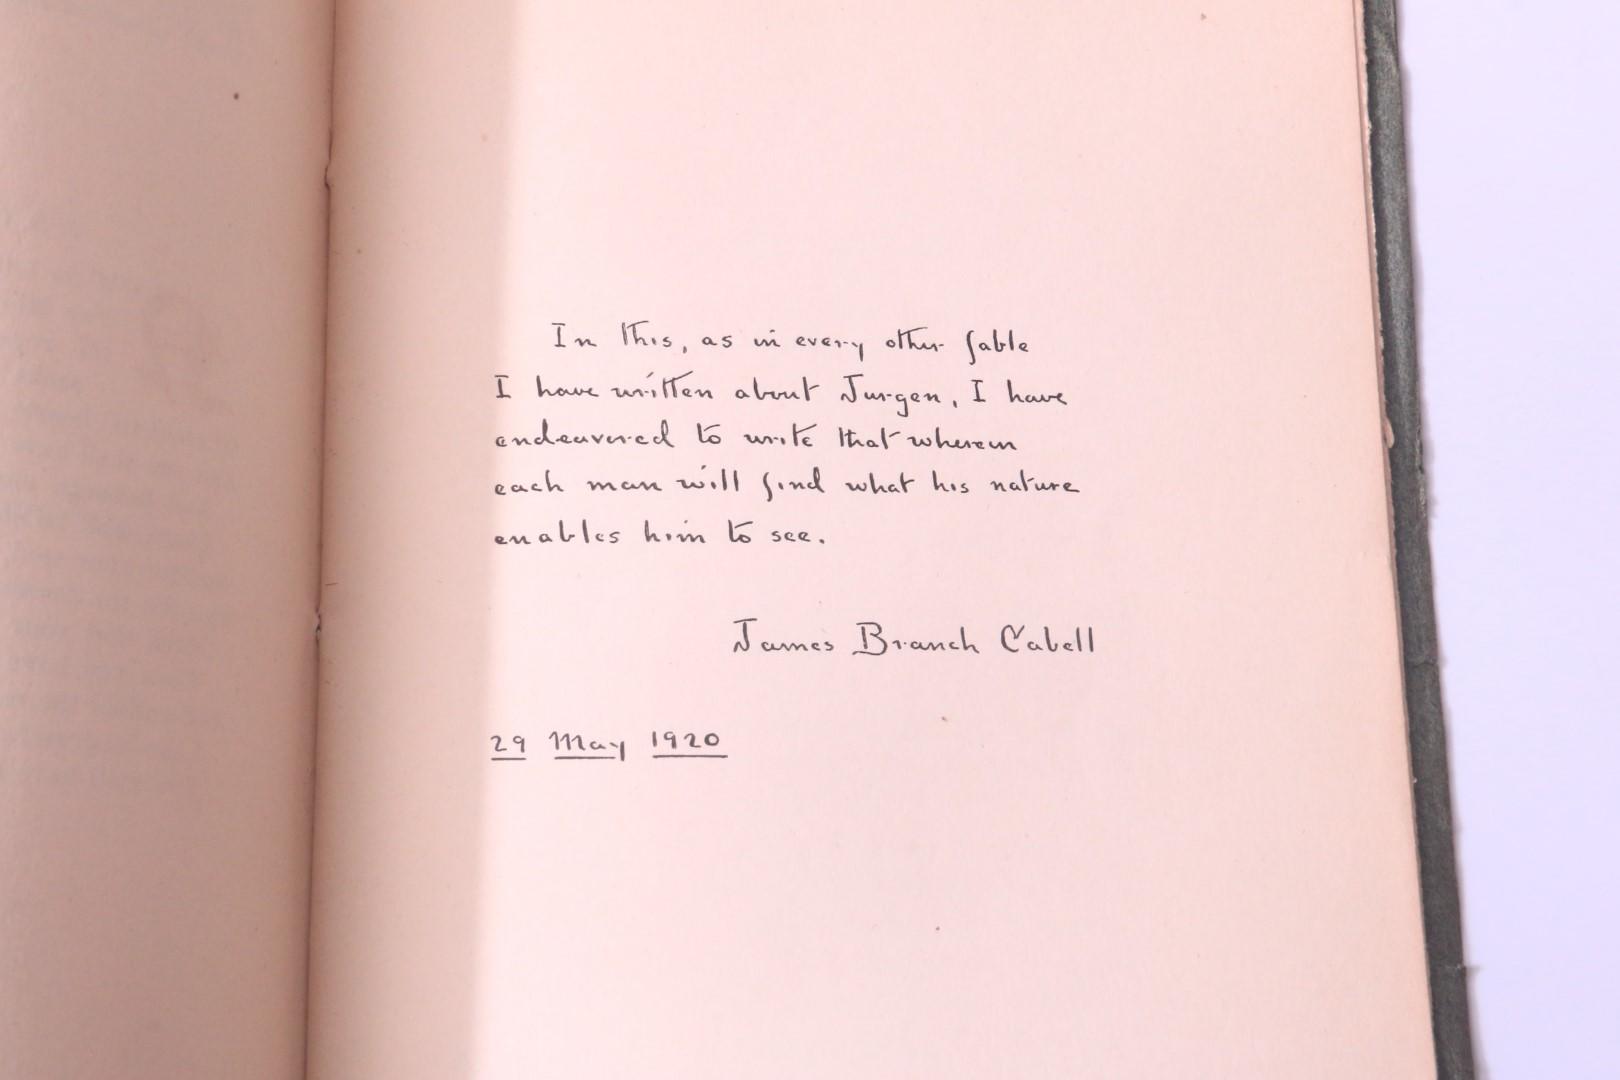 James Branch Cabell - The Judging of Jurgen - The Bookfellows, 1920, Signed First Edition.